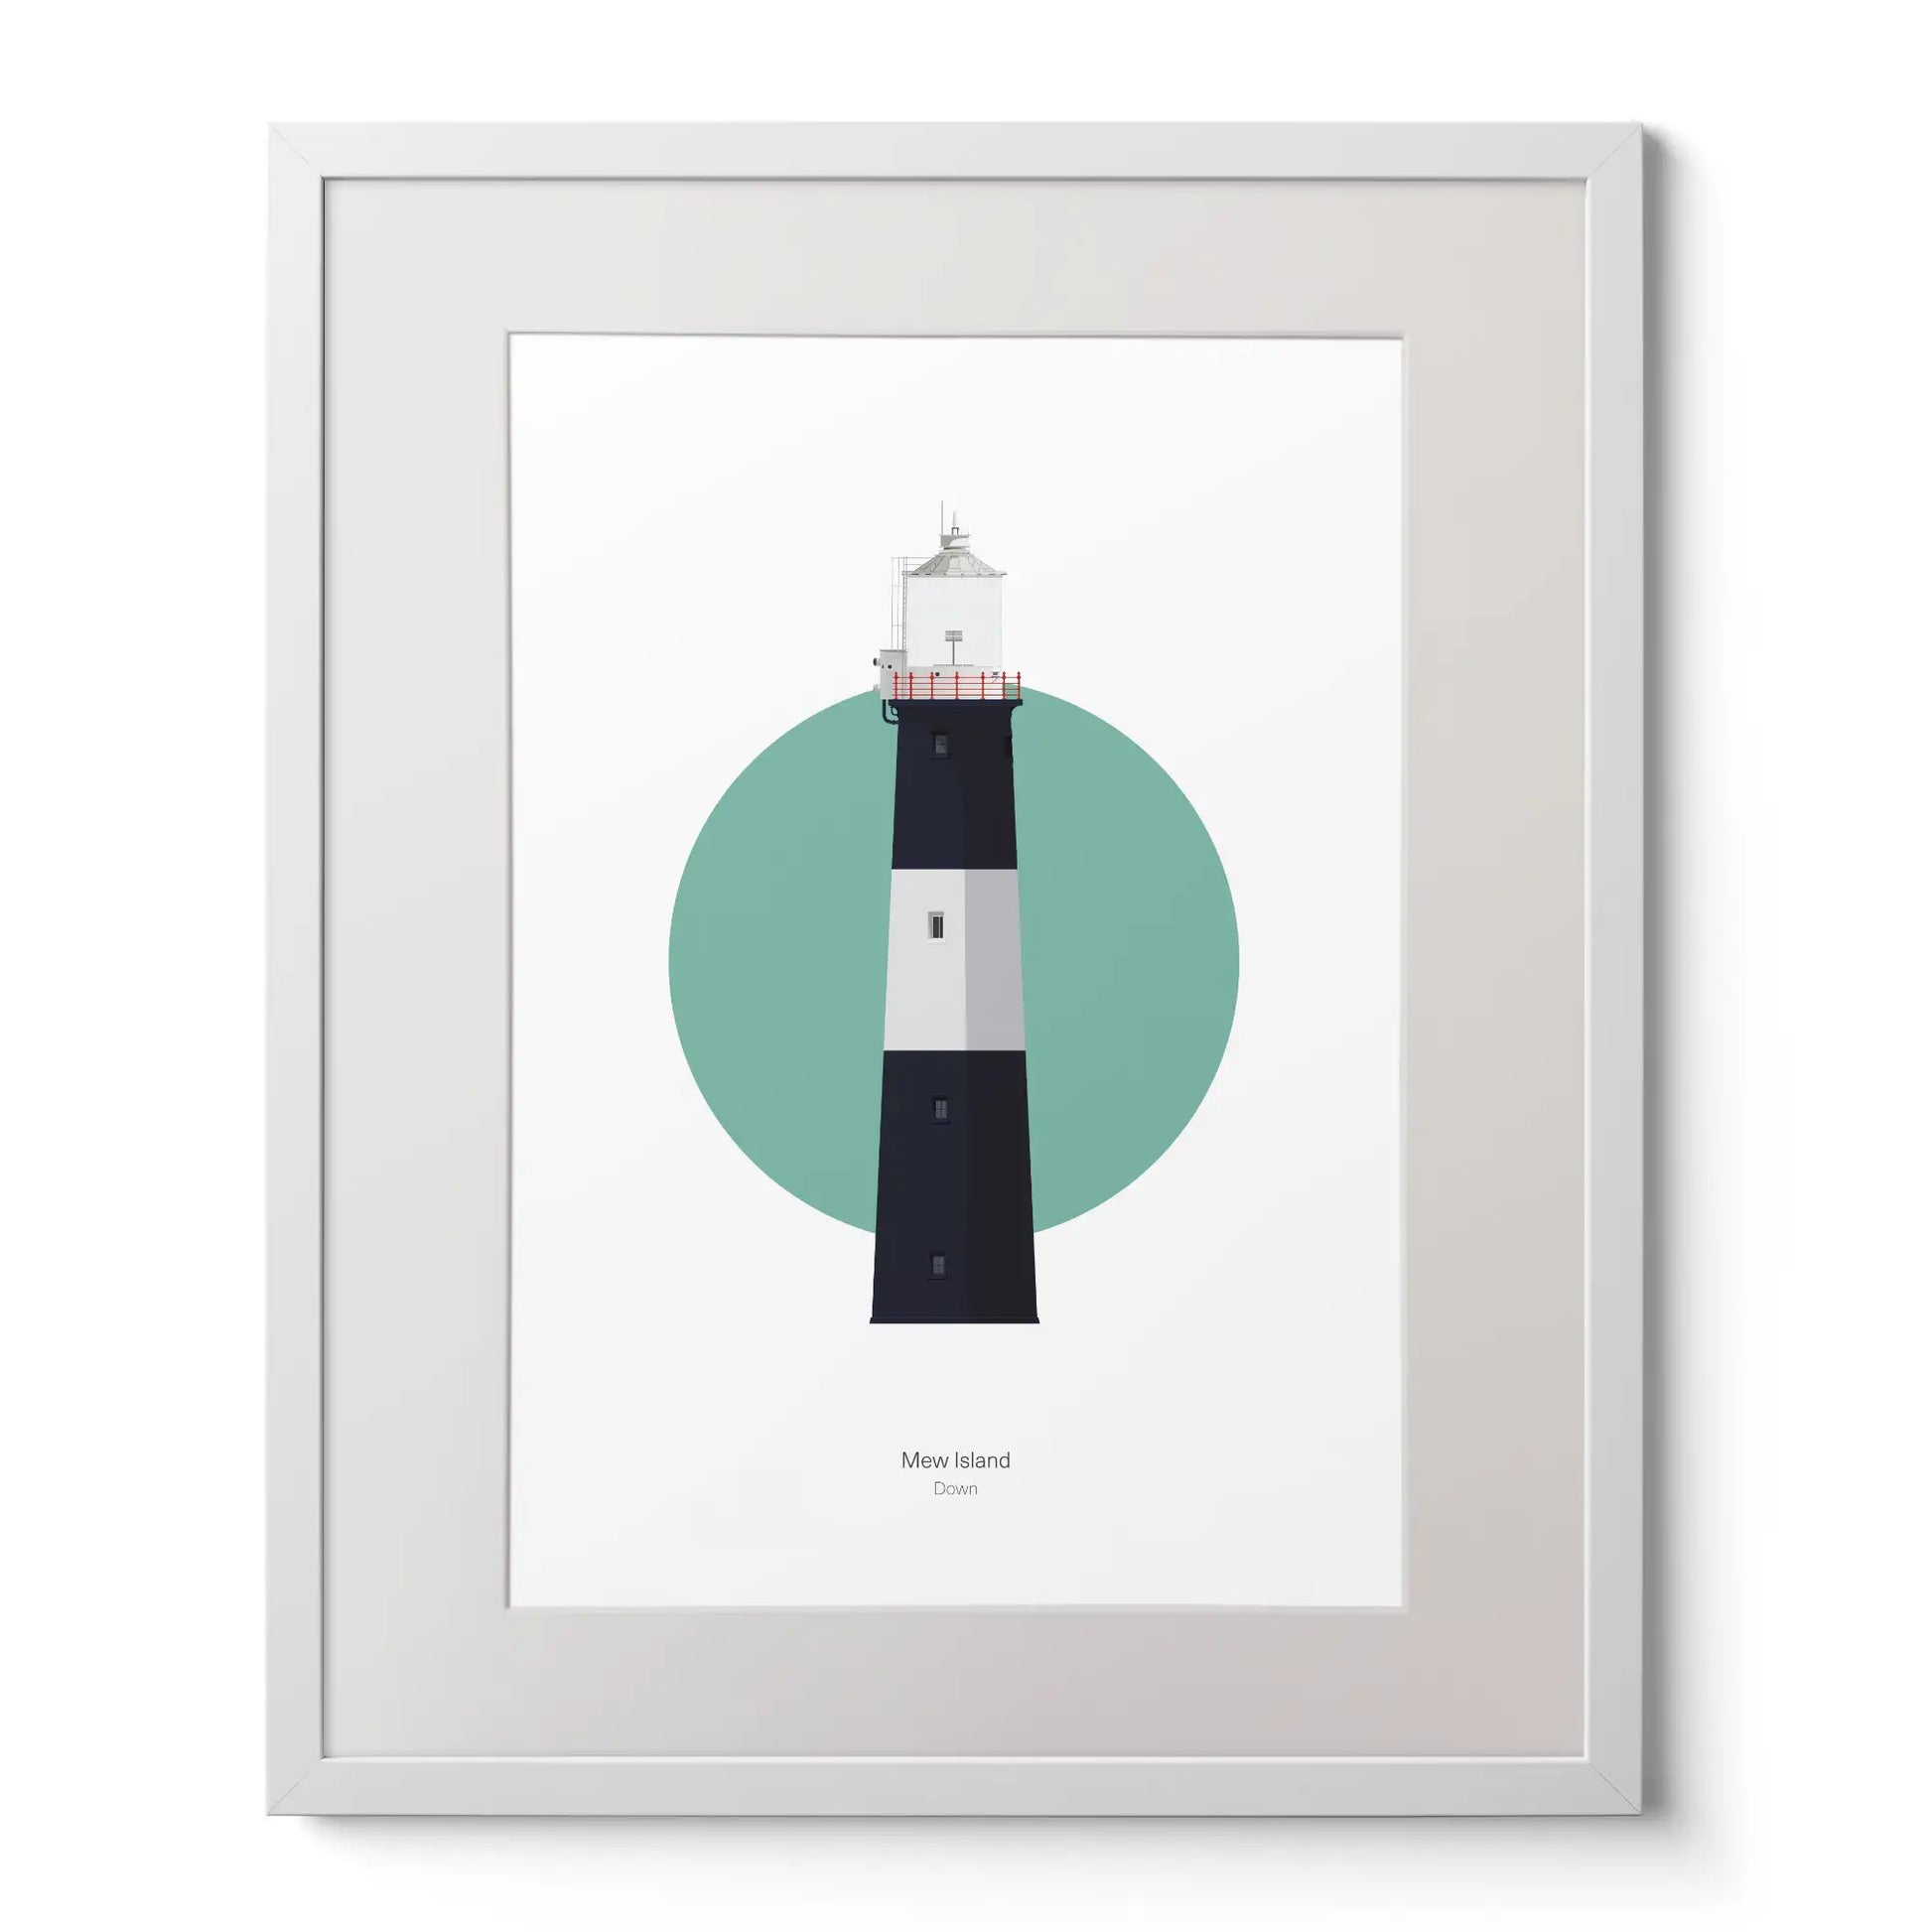 Contemporary art print of Mew Island lighthouse on a white background inside light blue square,  in a white frame measuring 40x50cm.